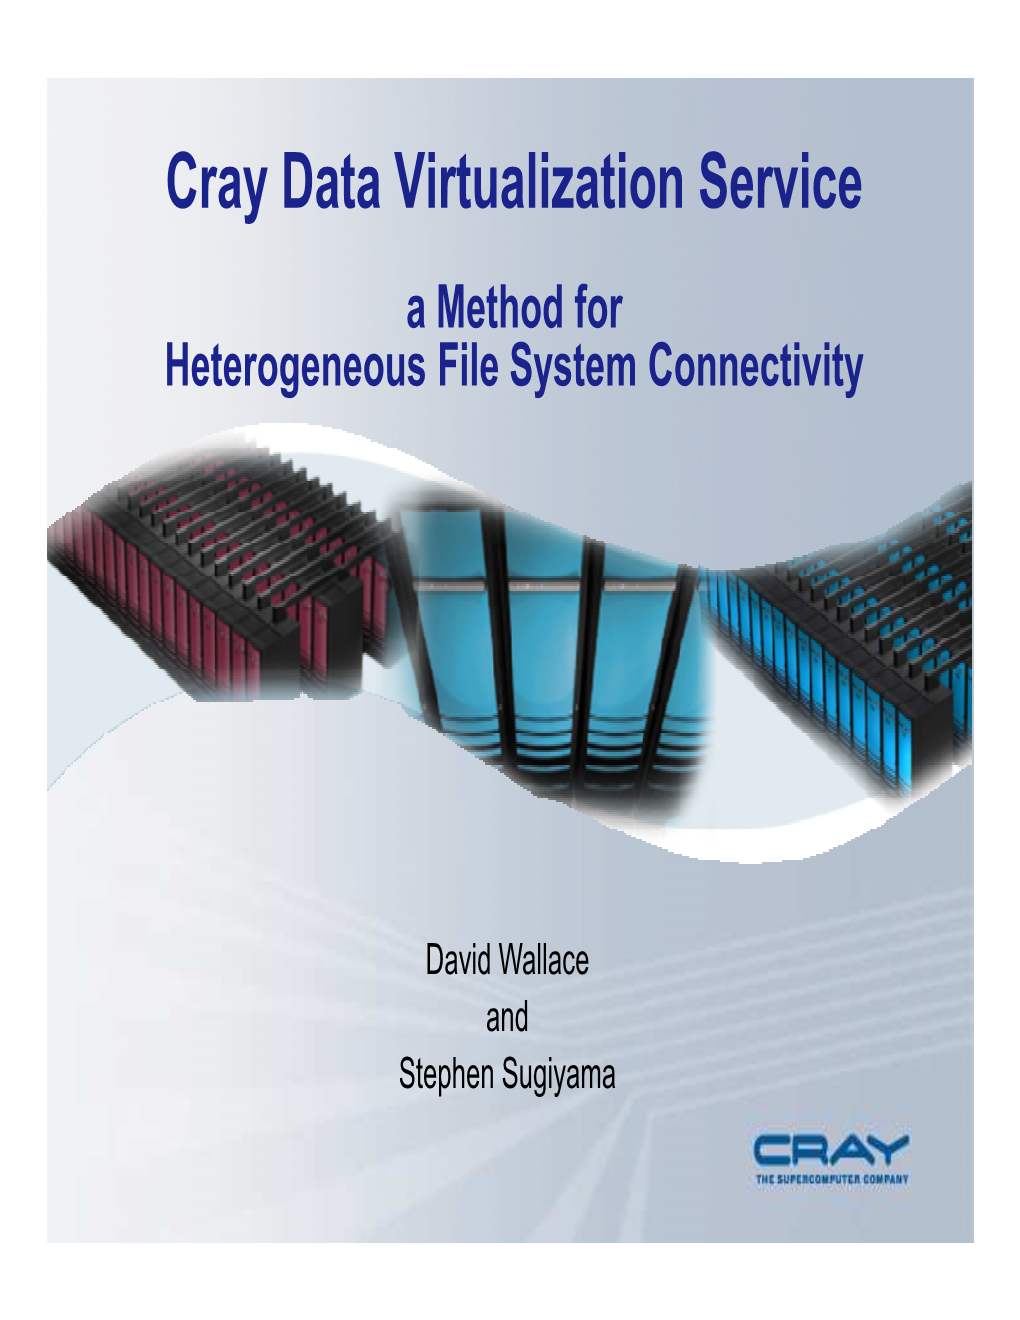 Cray Data Virtualization Service a Method for Heterogeneous File System Connectivity